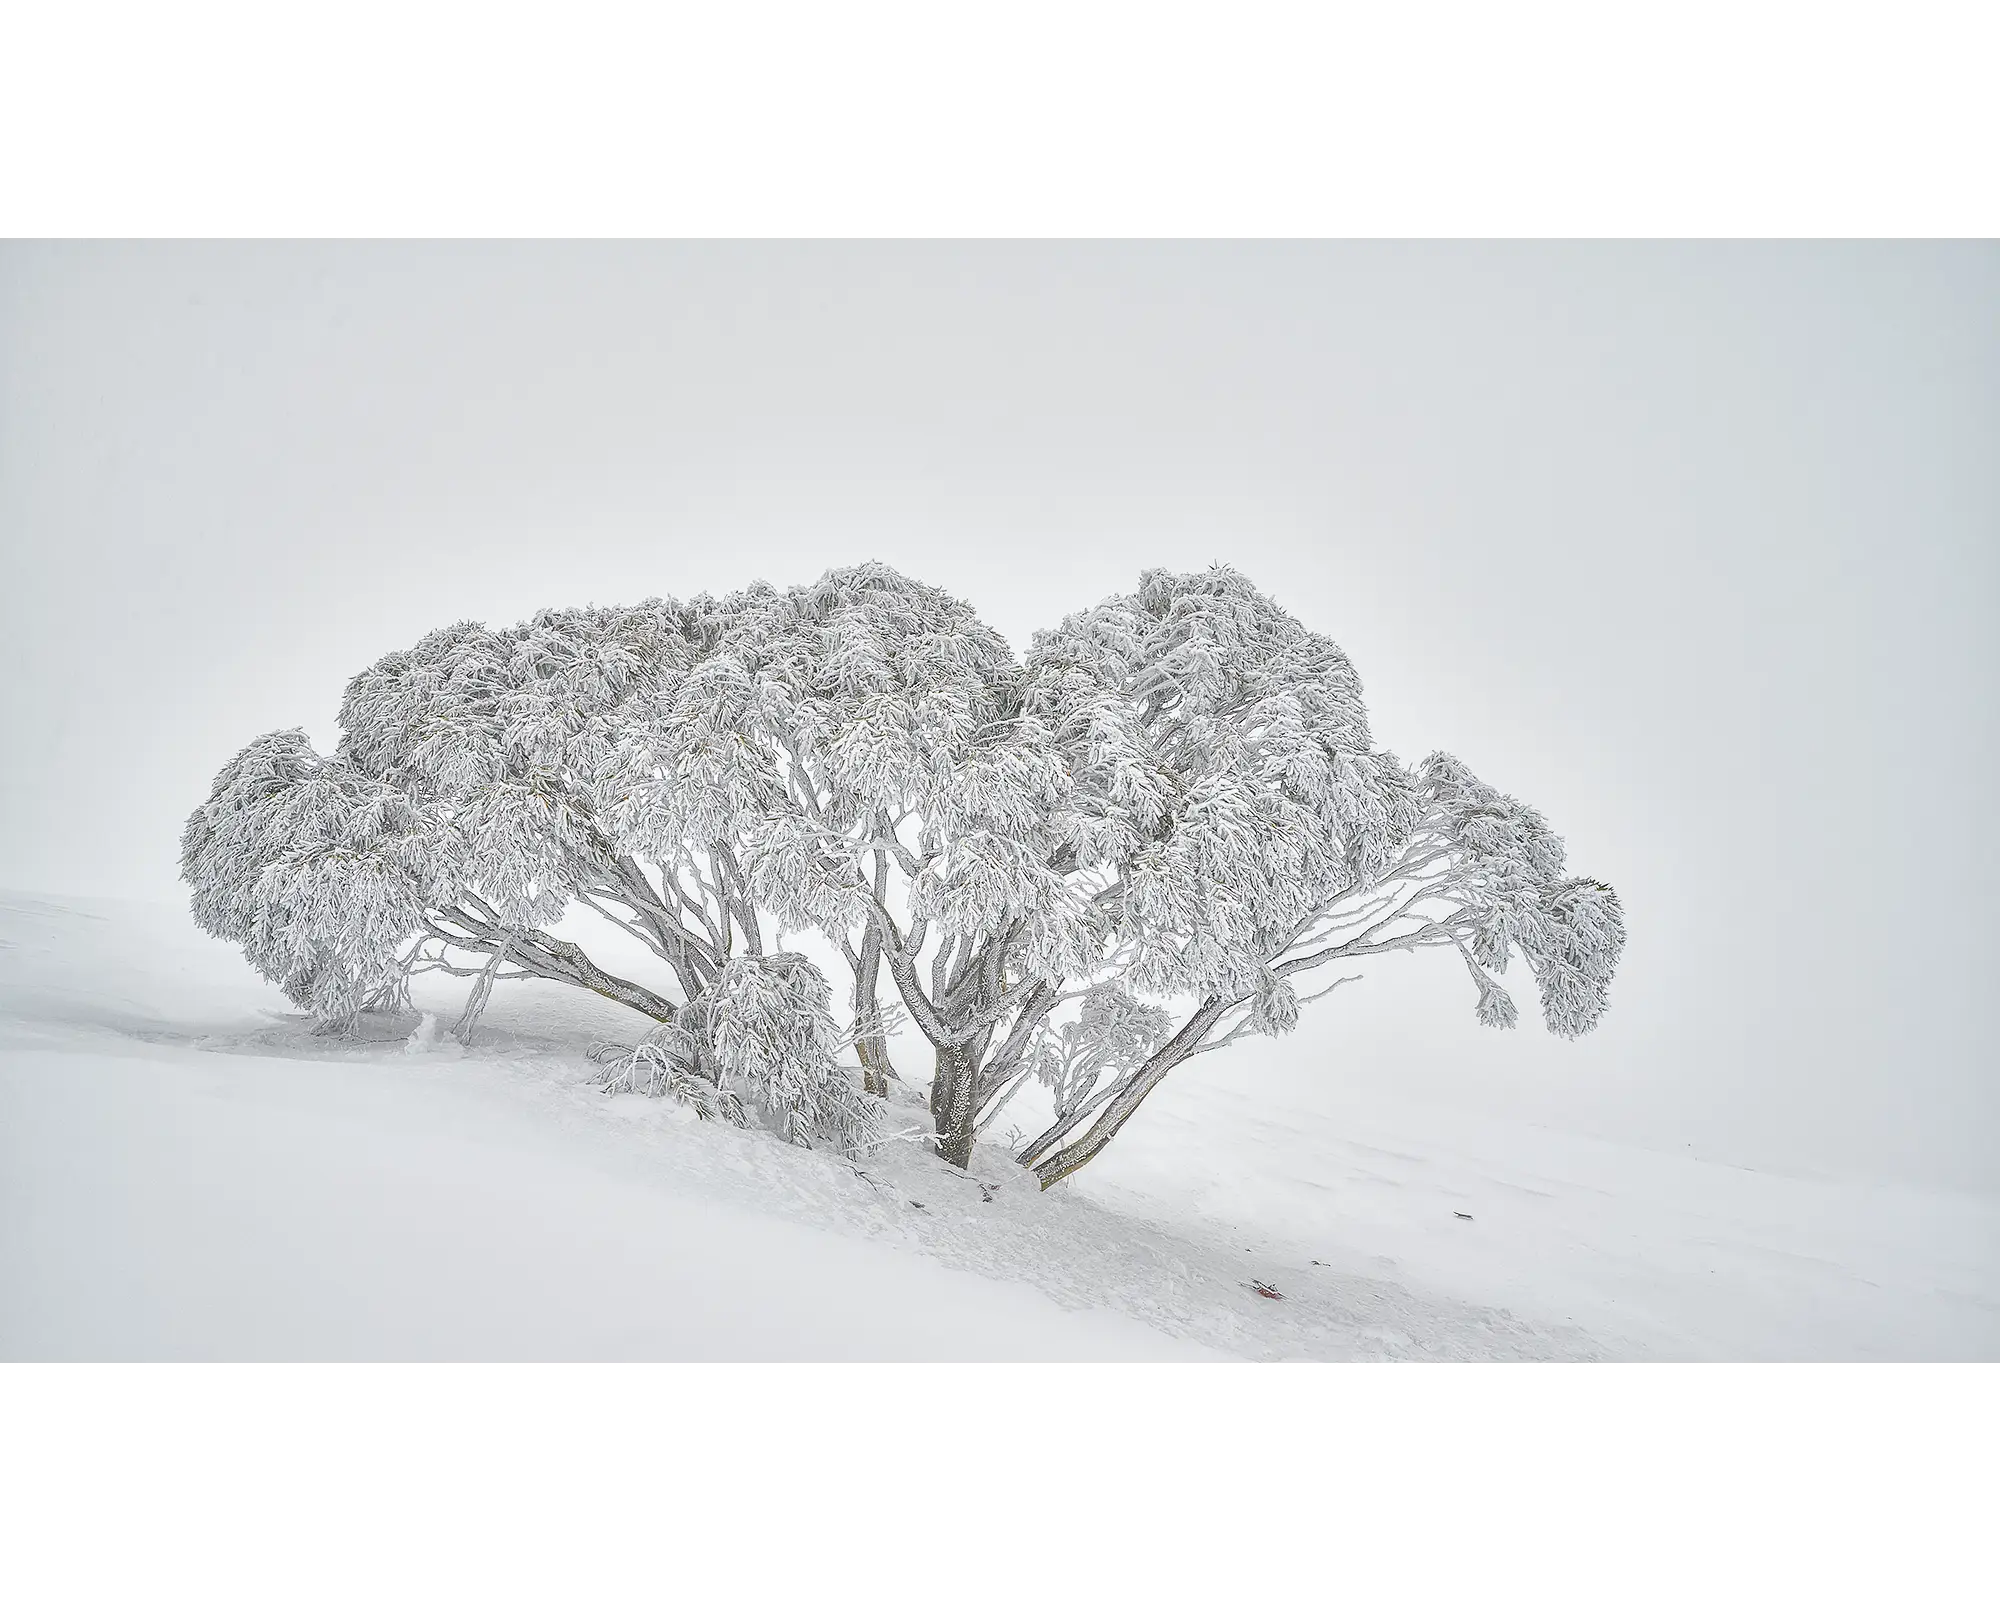 Revealed. Snow gum covered in falling snow.